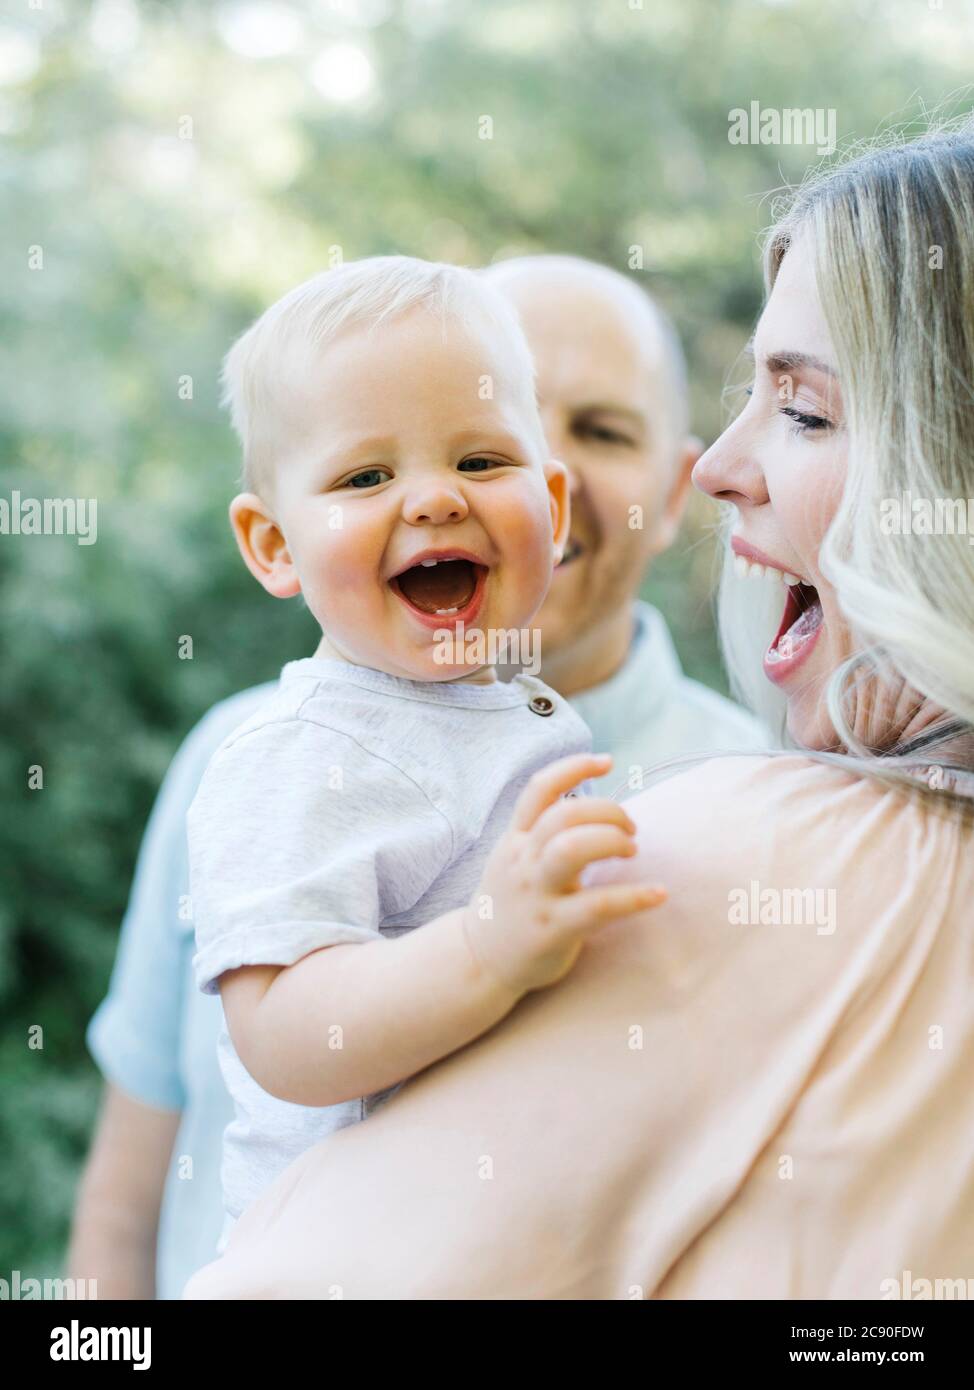 Baby boy laughing outdoors with his parents Stock Photo